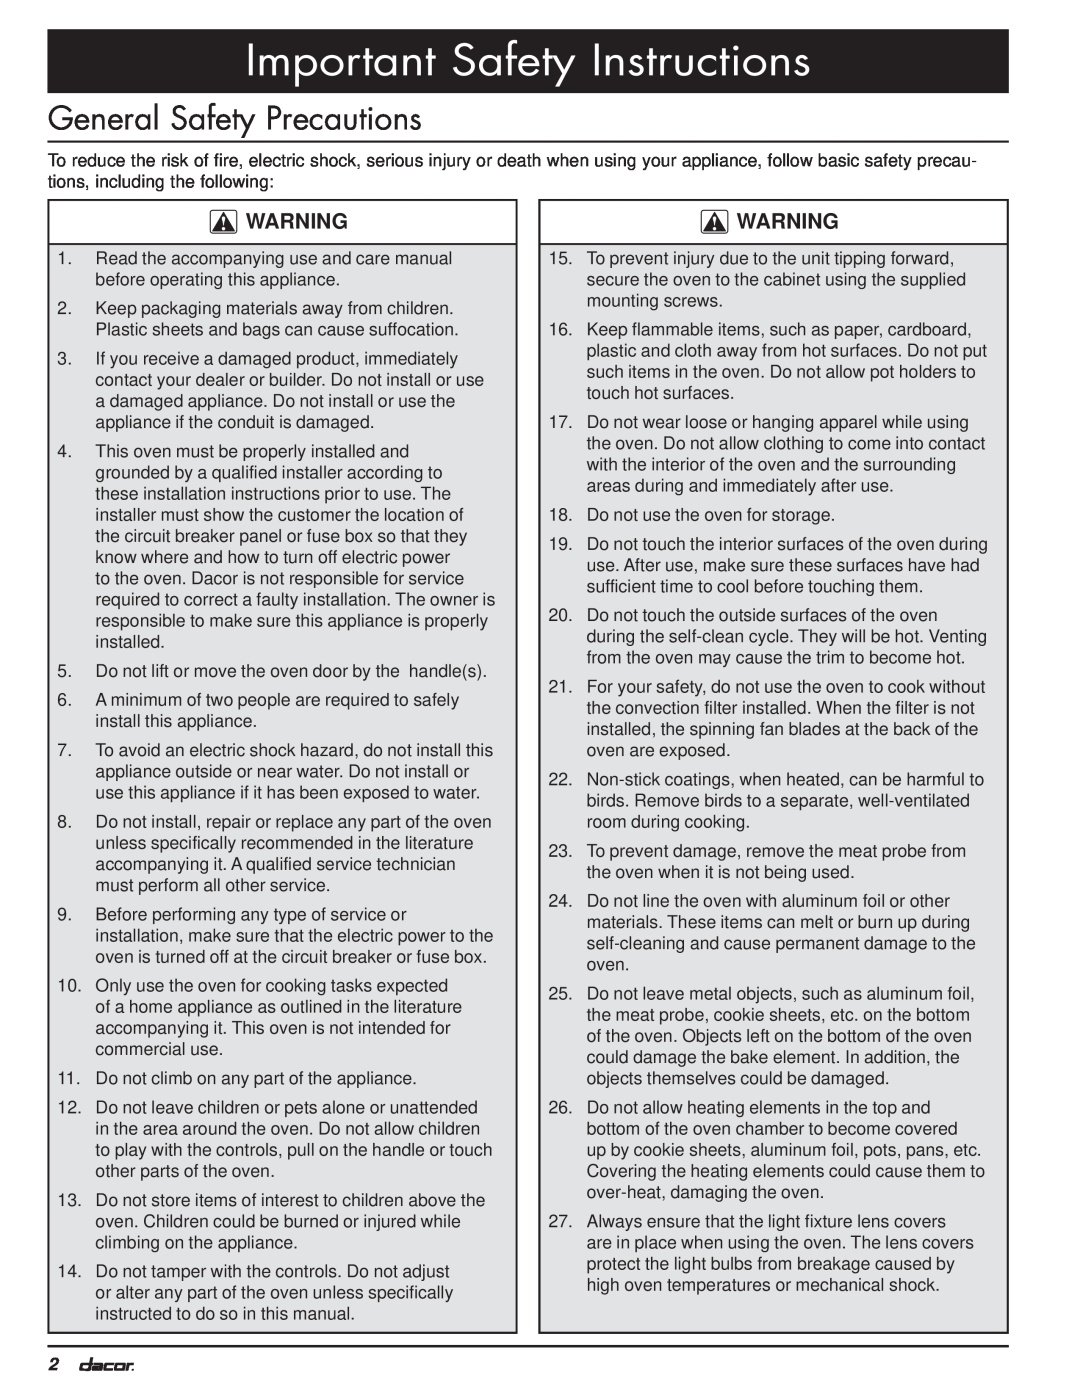 Dacor MO manual General Safety Precautions, Important Safety Instructions 